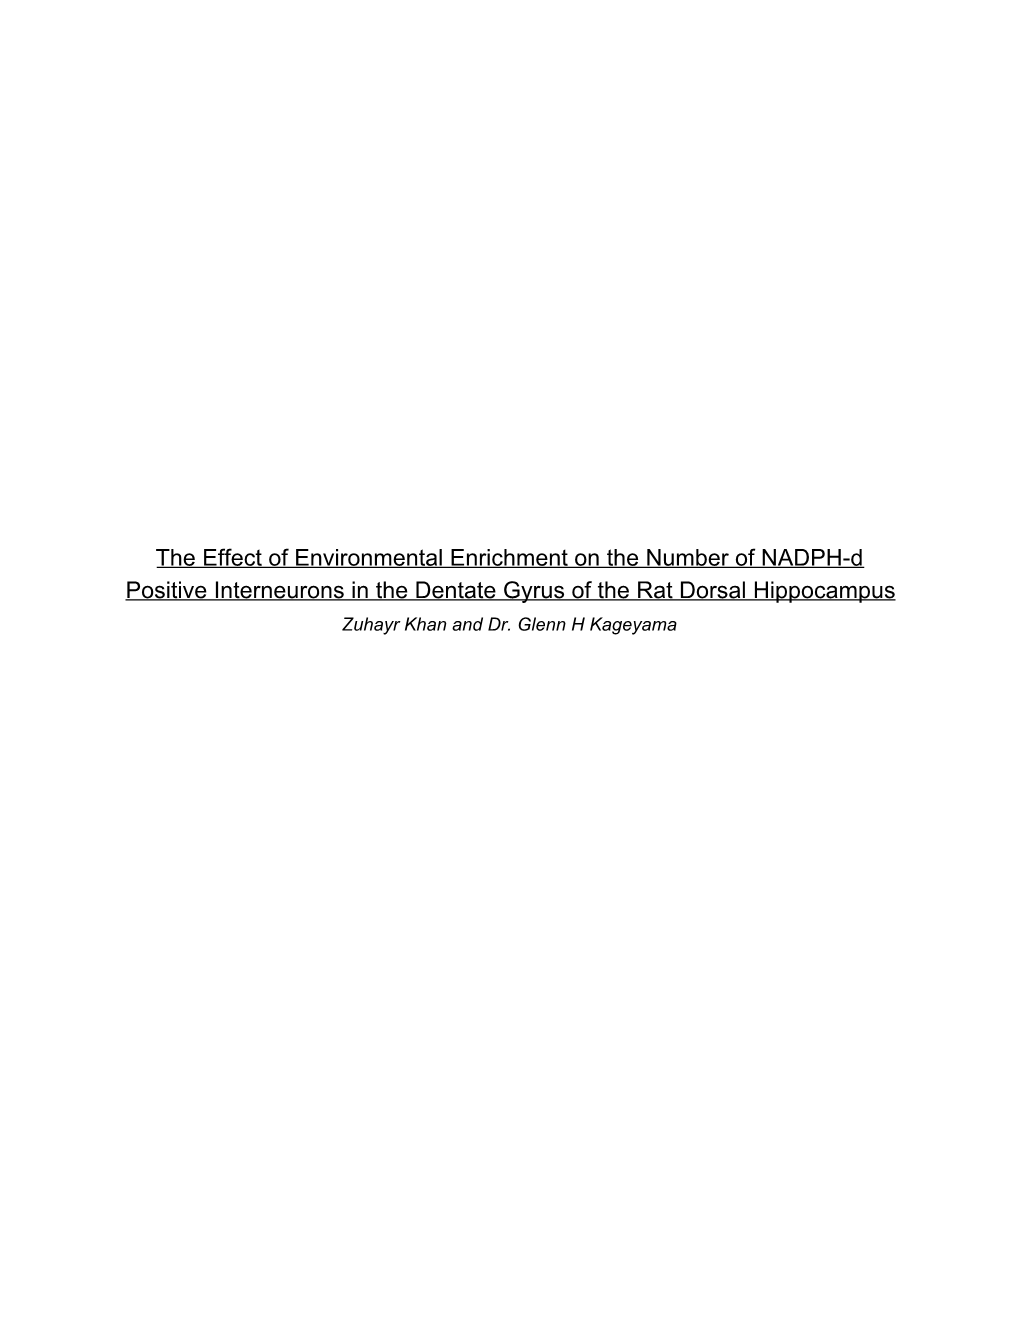 The Effect of Environmental Enrichment on the Numbre Of